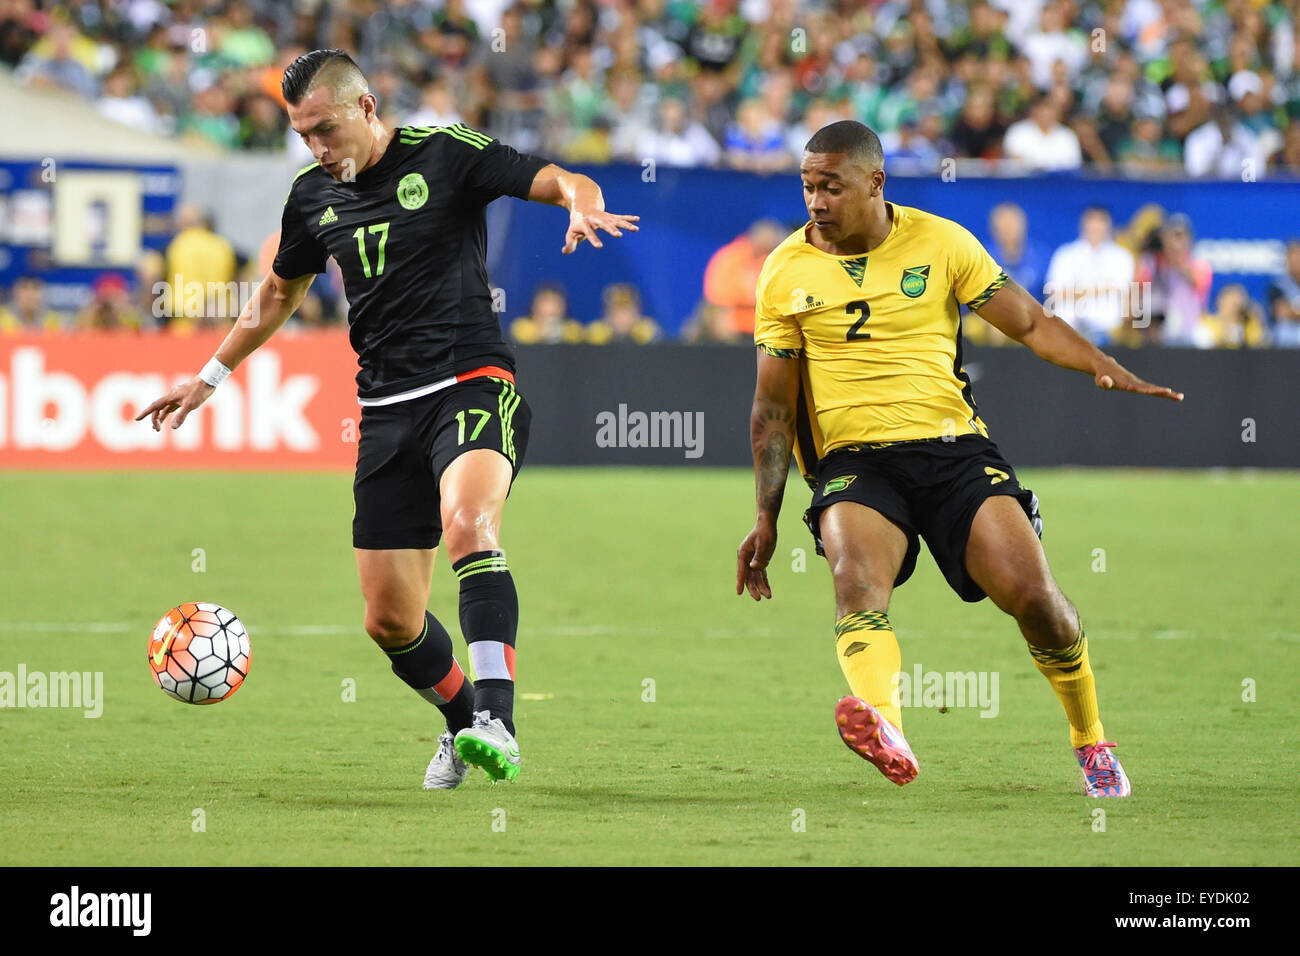 Philadelphia, Pennsylvania, USA. 26th July, 2015. Mexico midfielder Jorge Torres Nilo #17 and Jamaica midfielder Christopher Humphrey #2 chase after a loose ball during the 2015 CONCACAF Gold Cup final between Jamaica and Mexico at Lincoln Financial Field in Philadelphia, Pennsylvania. Mexico defeated Jamaica 3-1. Rich Barnes/CSM/Alamy Live News Stock Photo